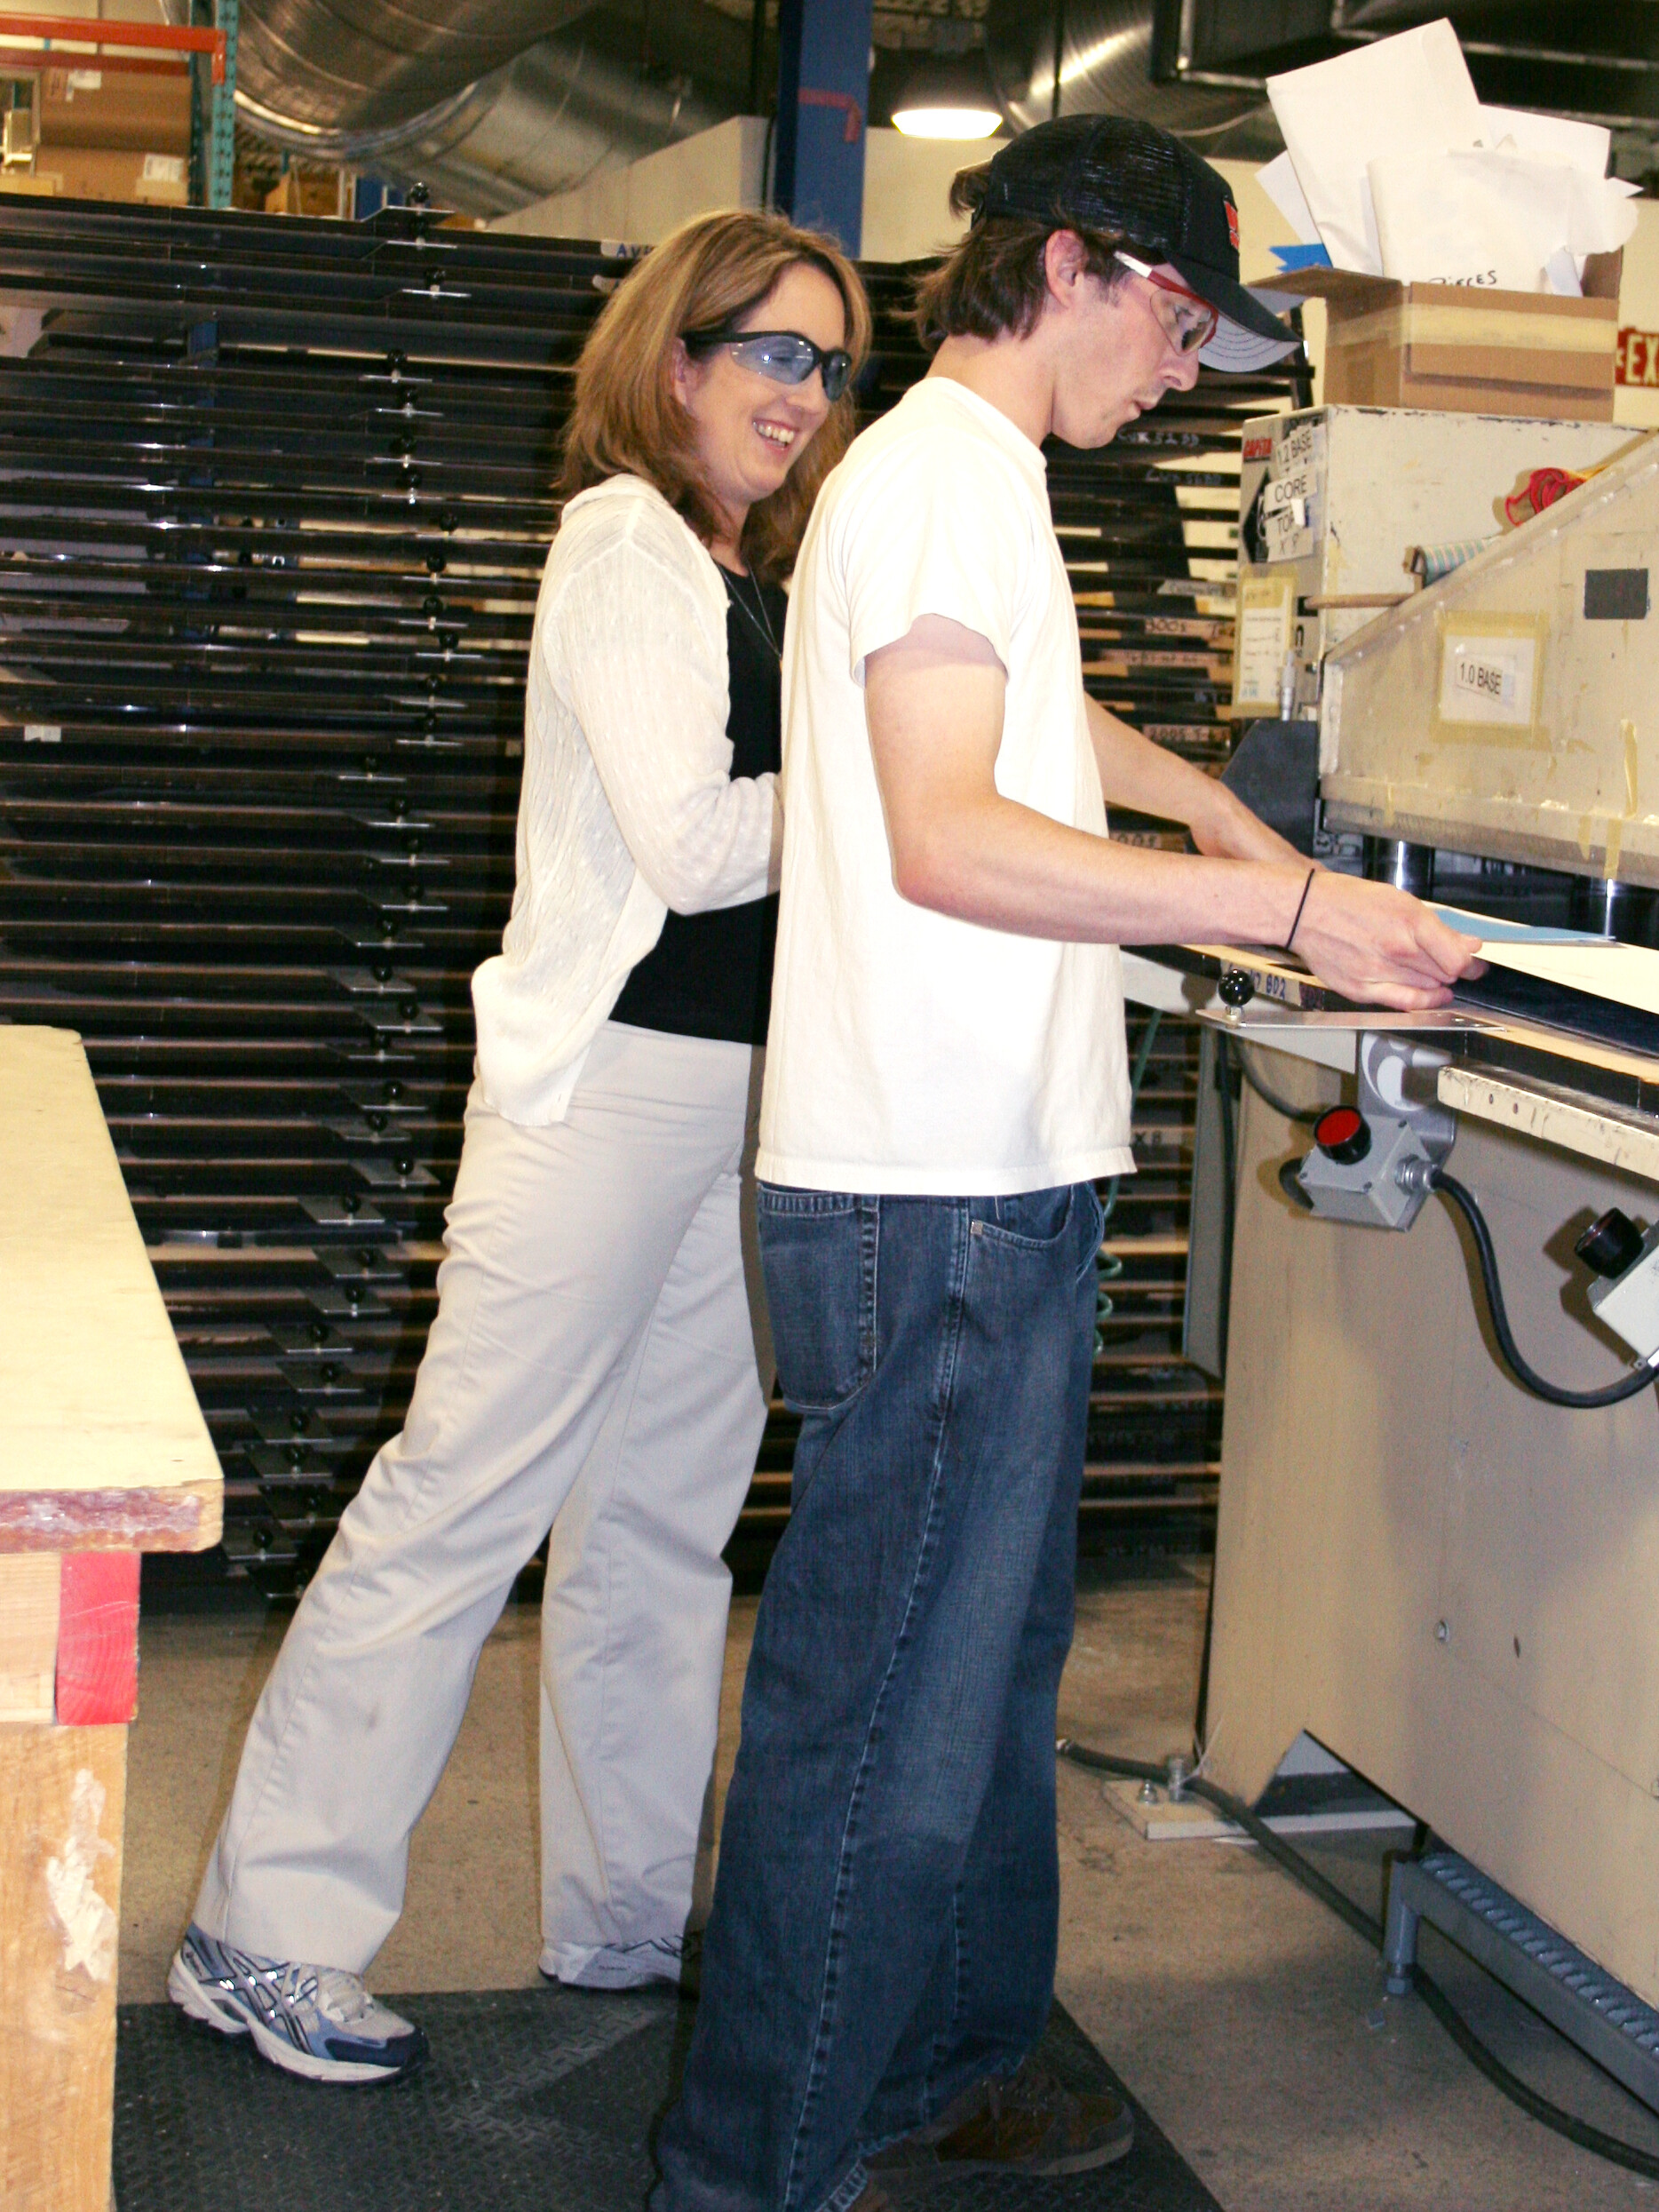 Louise showing an employee how to a workstation ergonomics